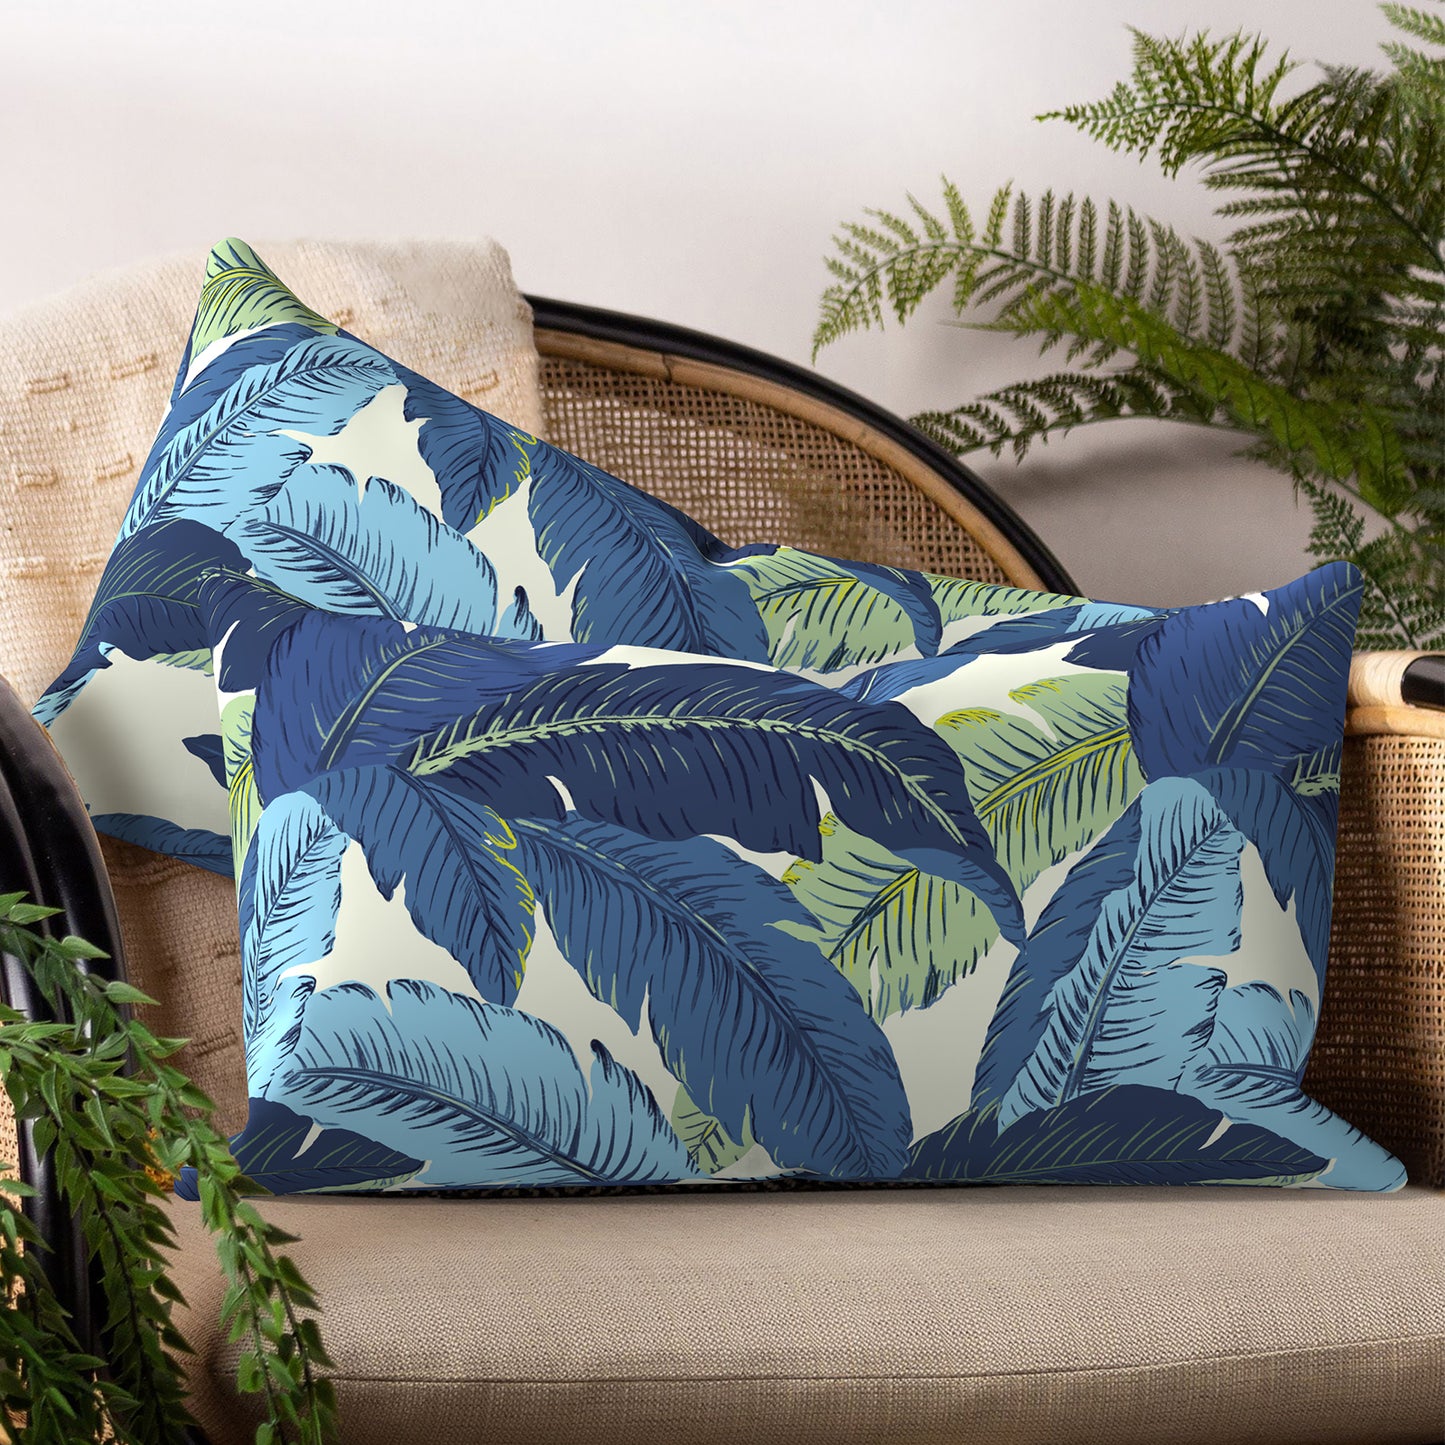 Melody Elephant Pack of 2 Outdoor Lumbar Pillow Covers, All Weather Cushion Pillow Cases 12x20 Inch, Pillowcase for Patio Couch Decoration, Swaying Palms Blue